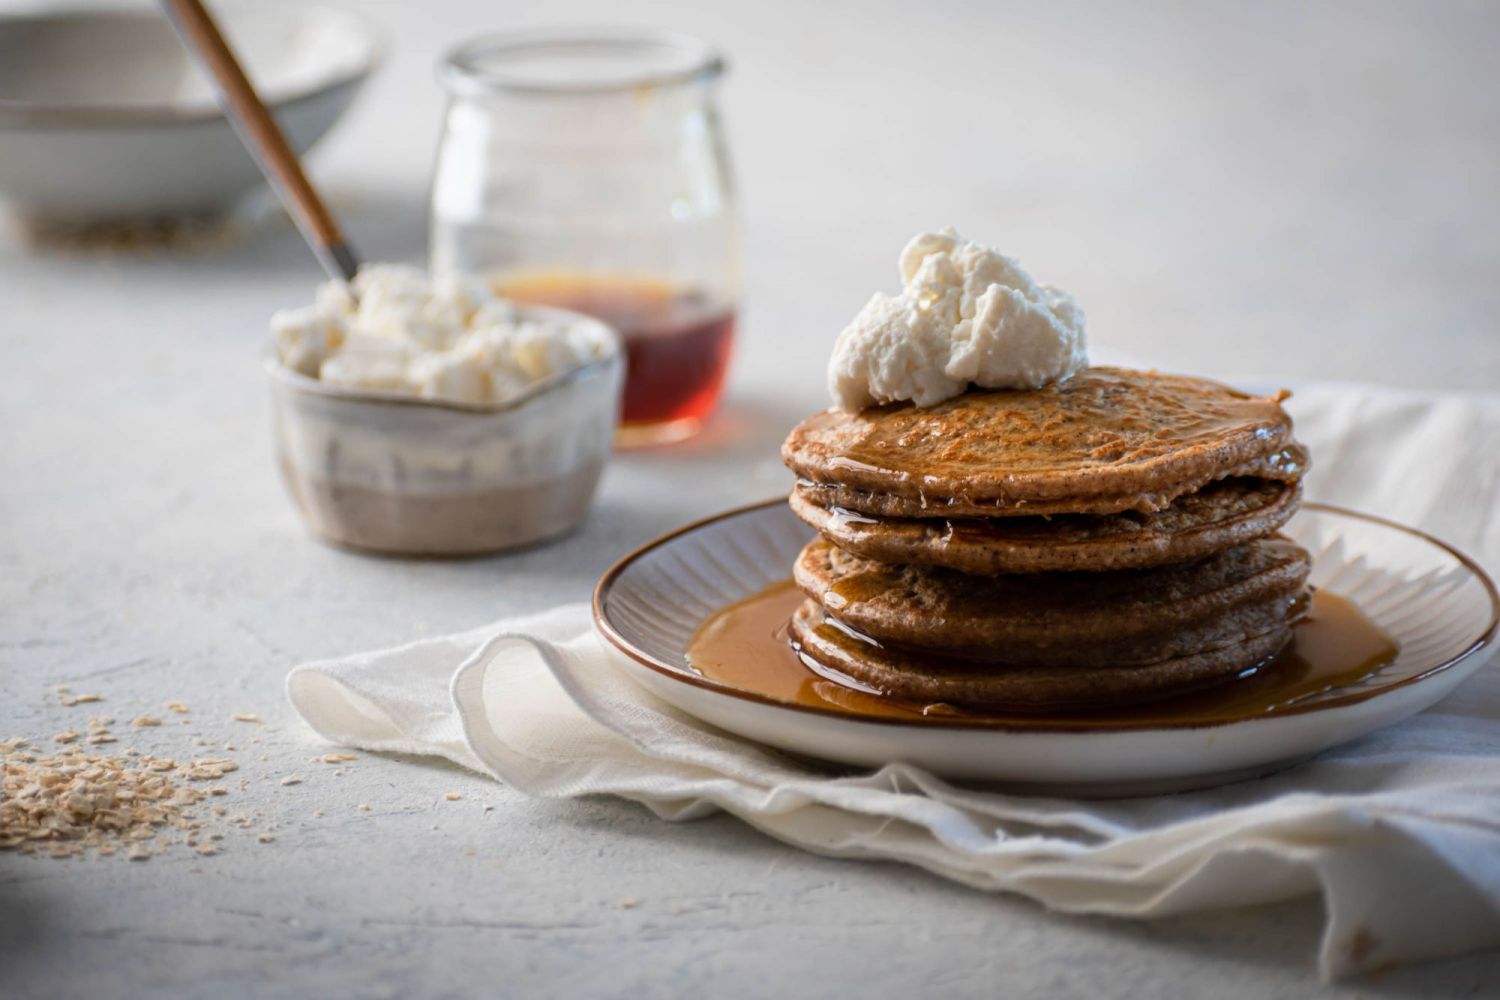 Oatmeal pancakes with extra protein from cottage cheese and egg whites served with whipped cream and syrup.